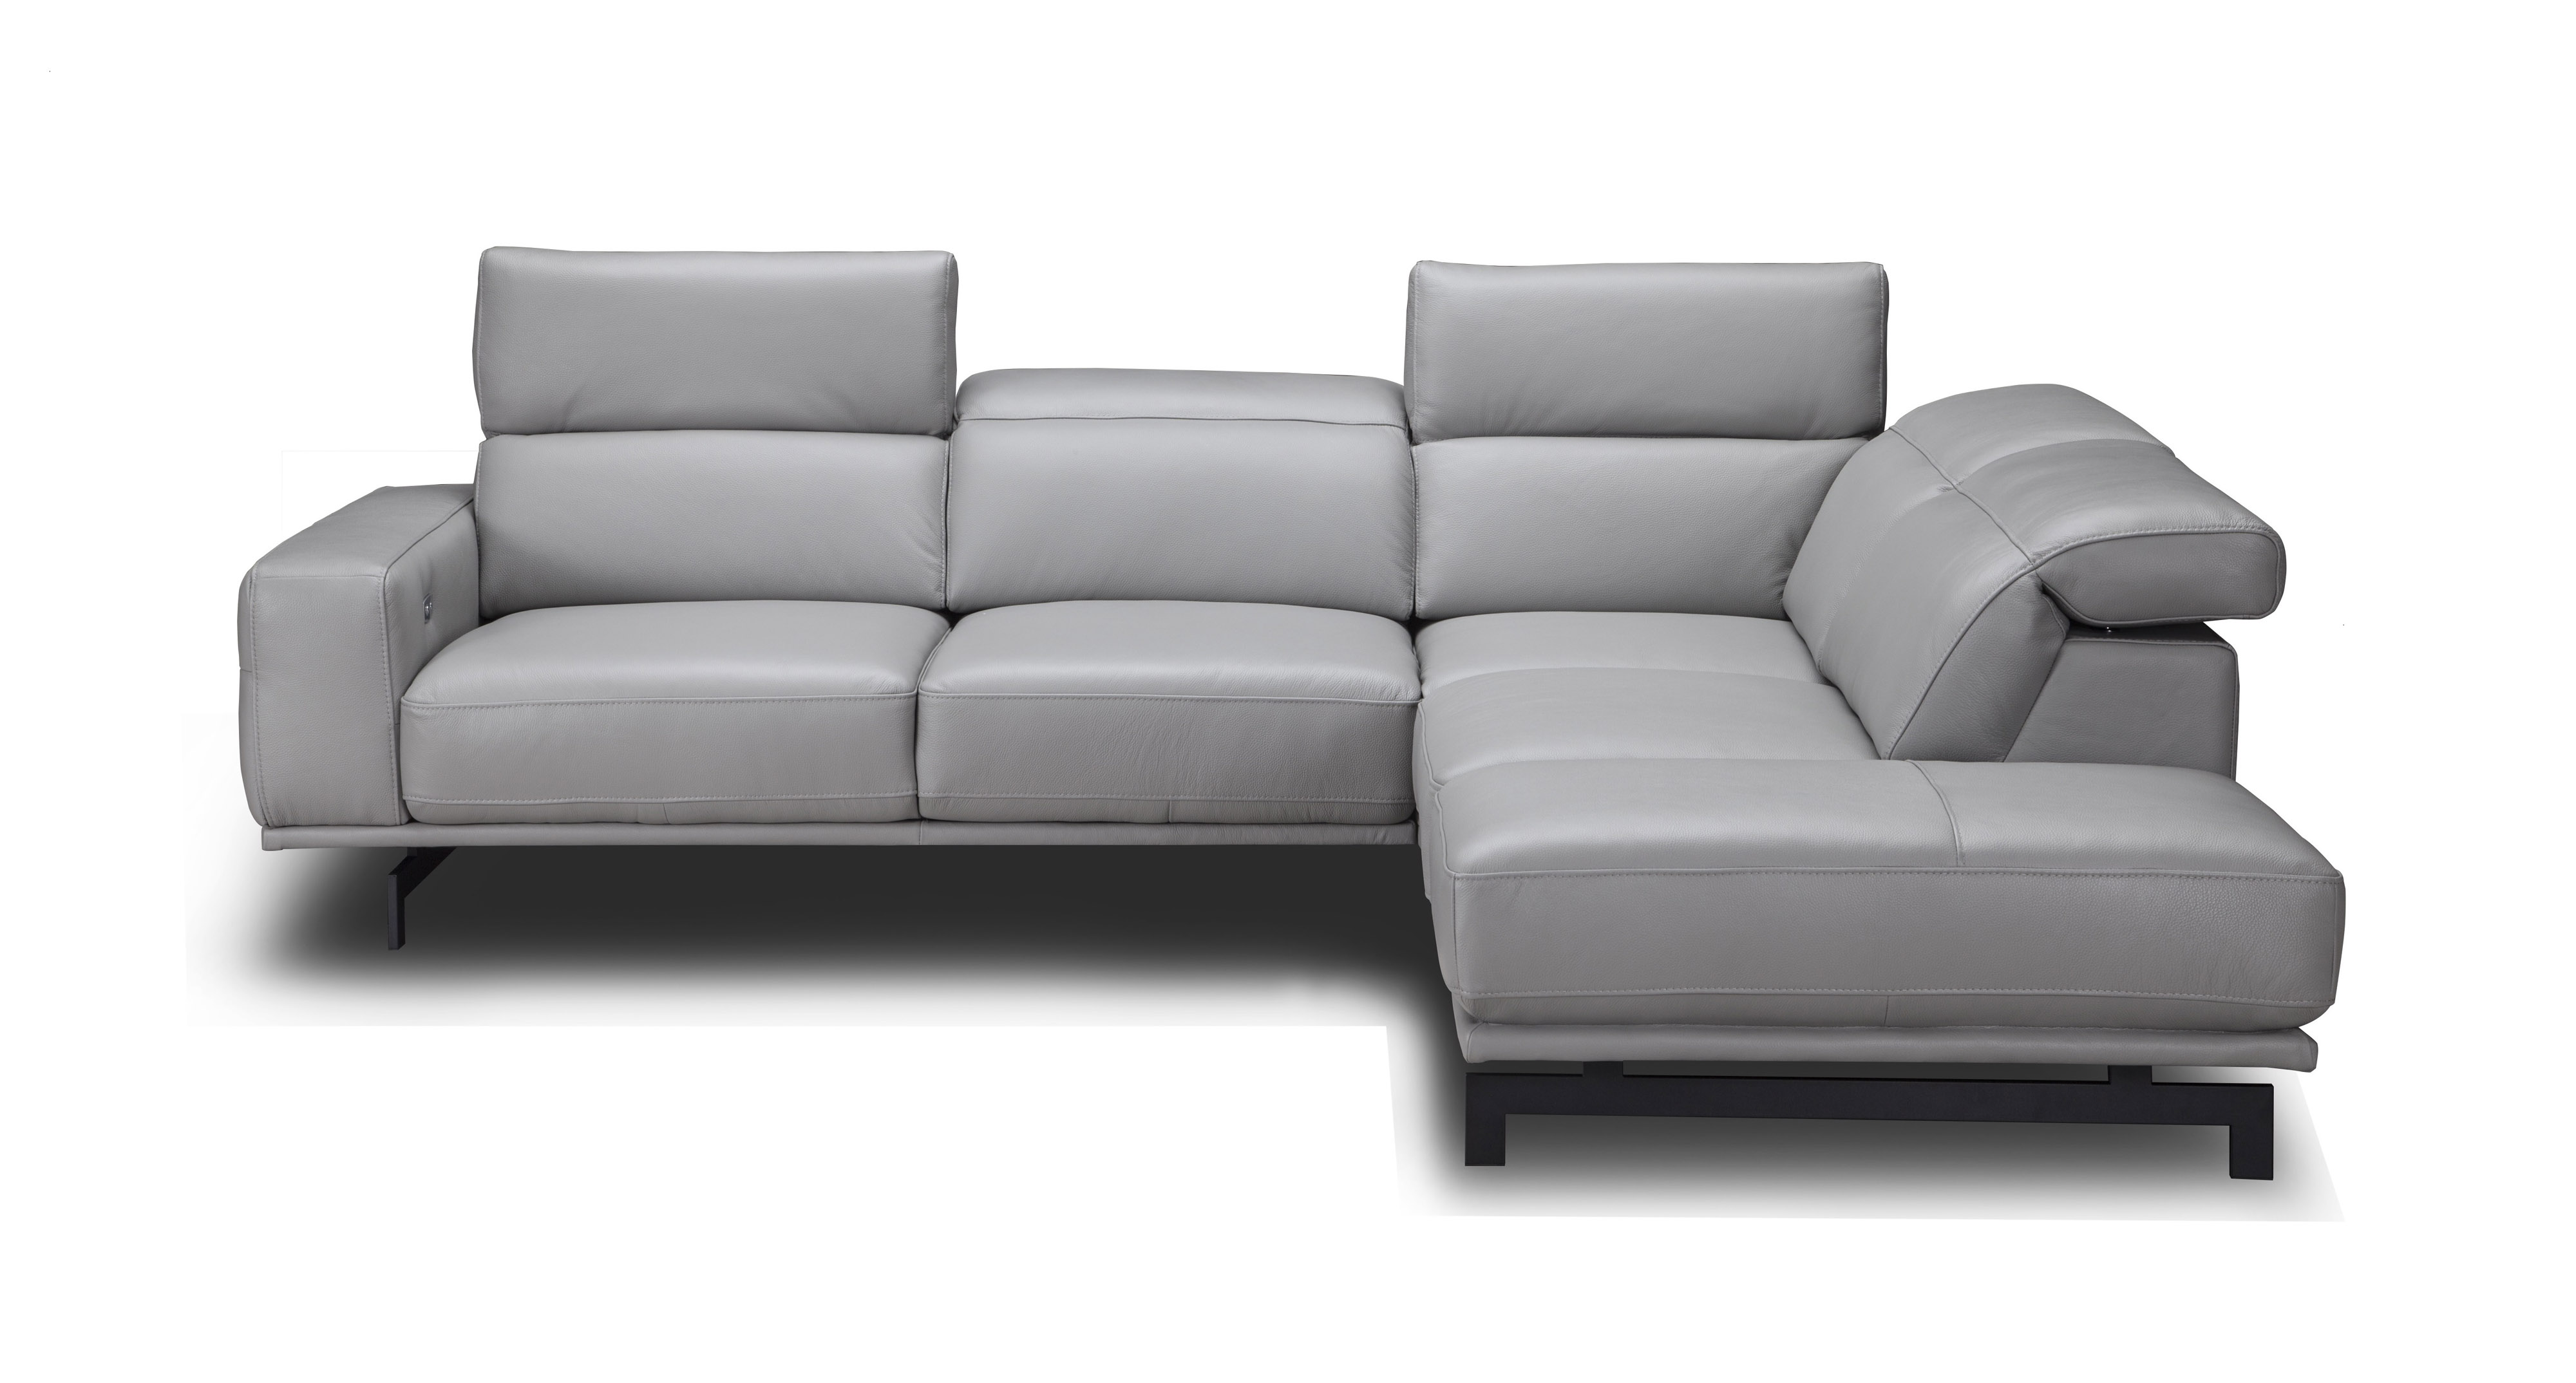 Adjustable Advanced Italian Top Grain Leather Sectional Sofa - Click Image to Close